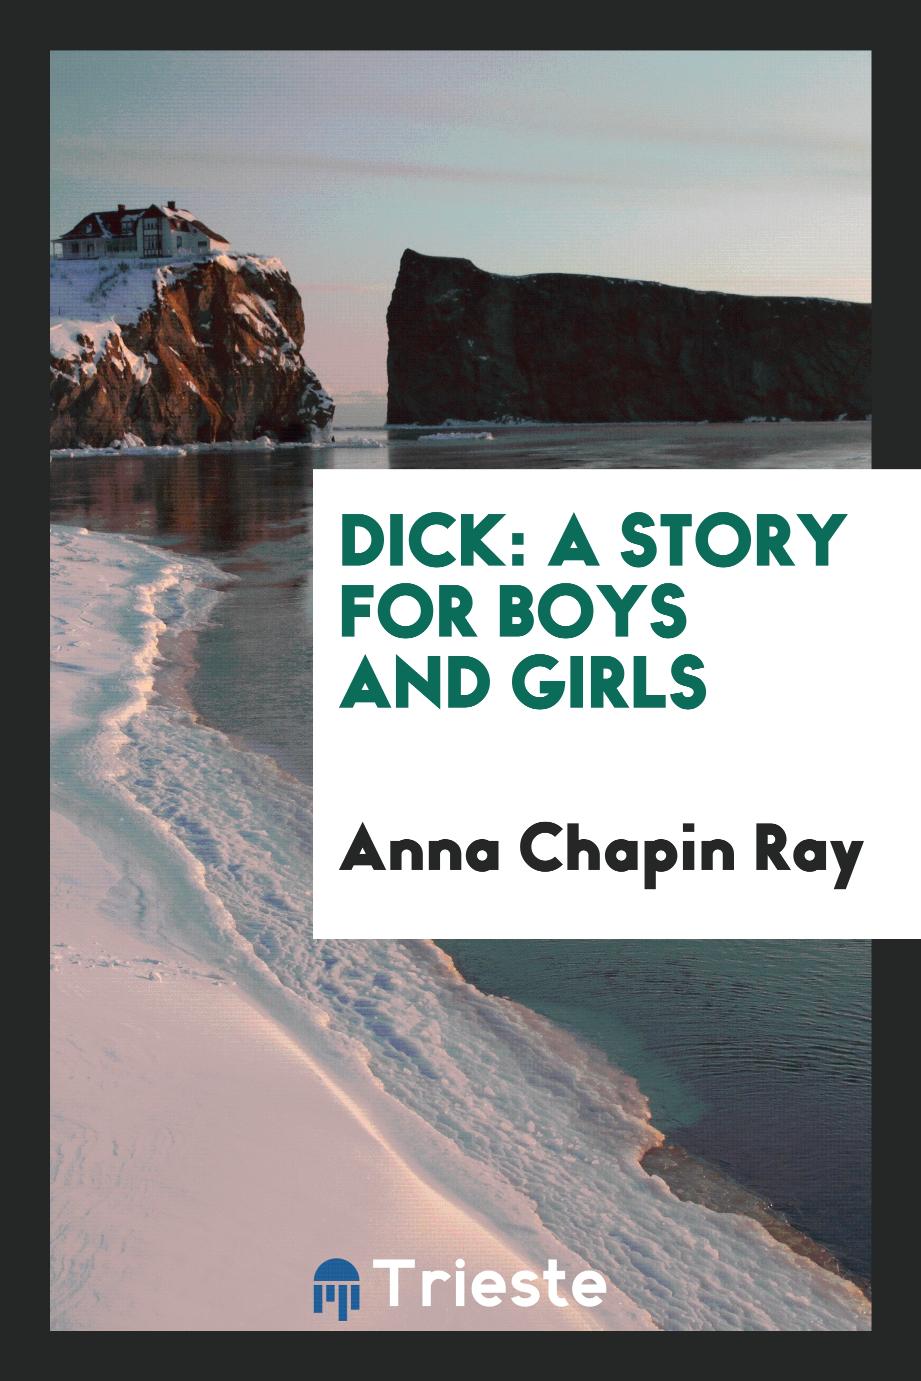 Dick: A Story for Boys and Girls